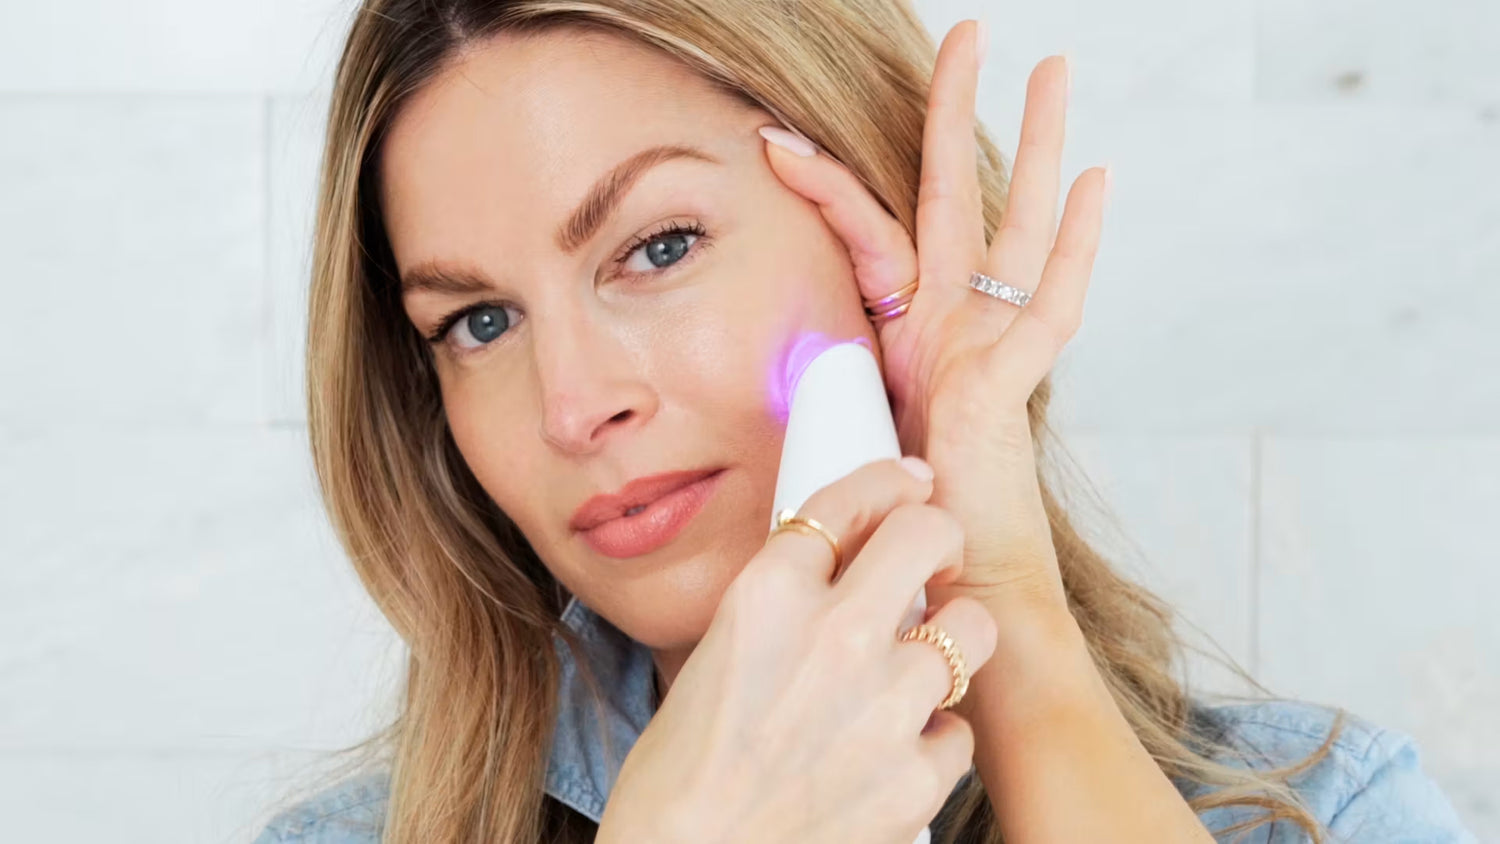 BeautyBio's Founder & CEO, Jamie O'Banion, shares her tips on how to get the most out of your GLOfacial Tool